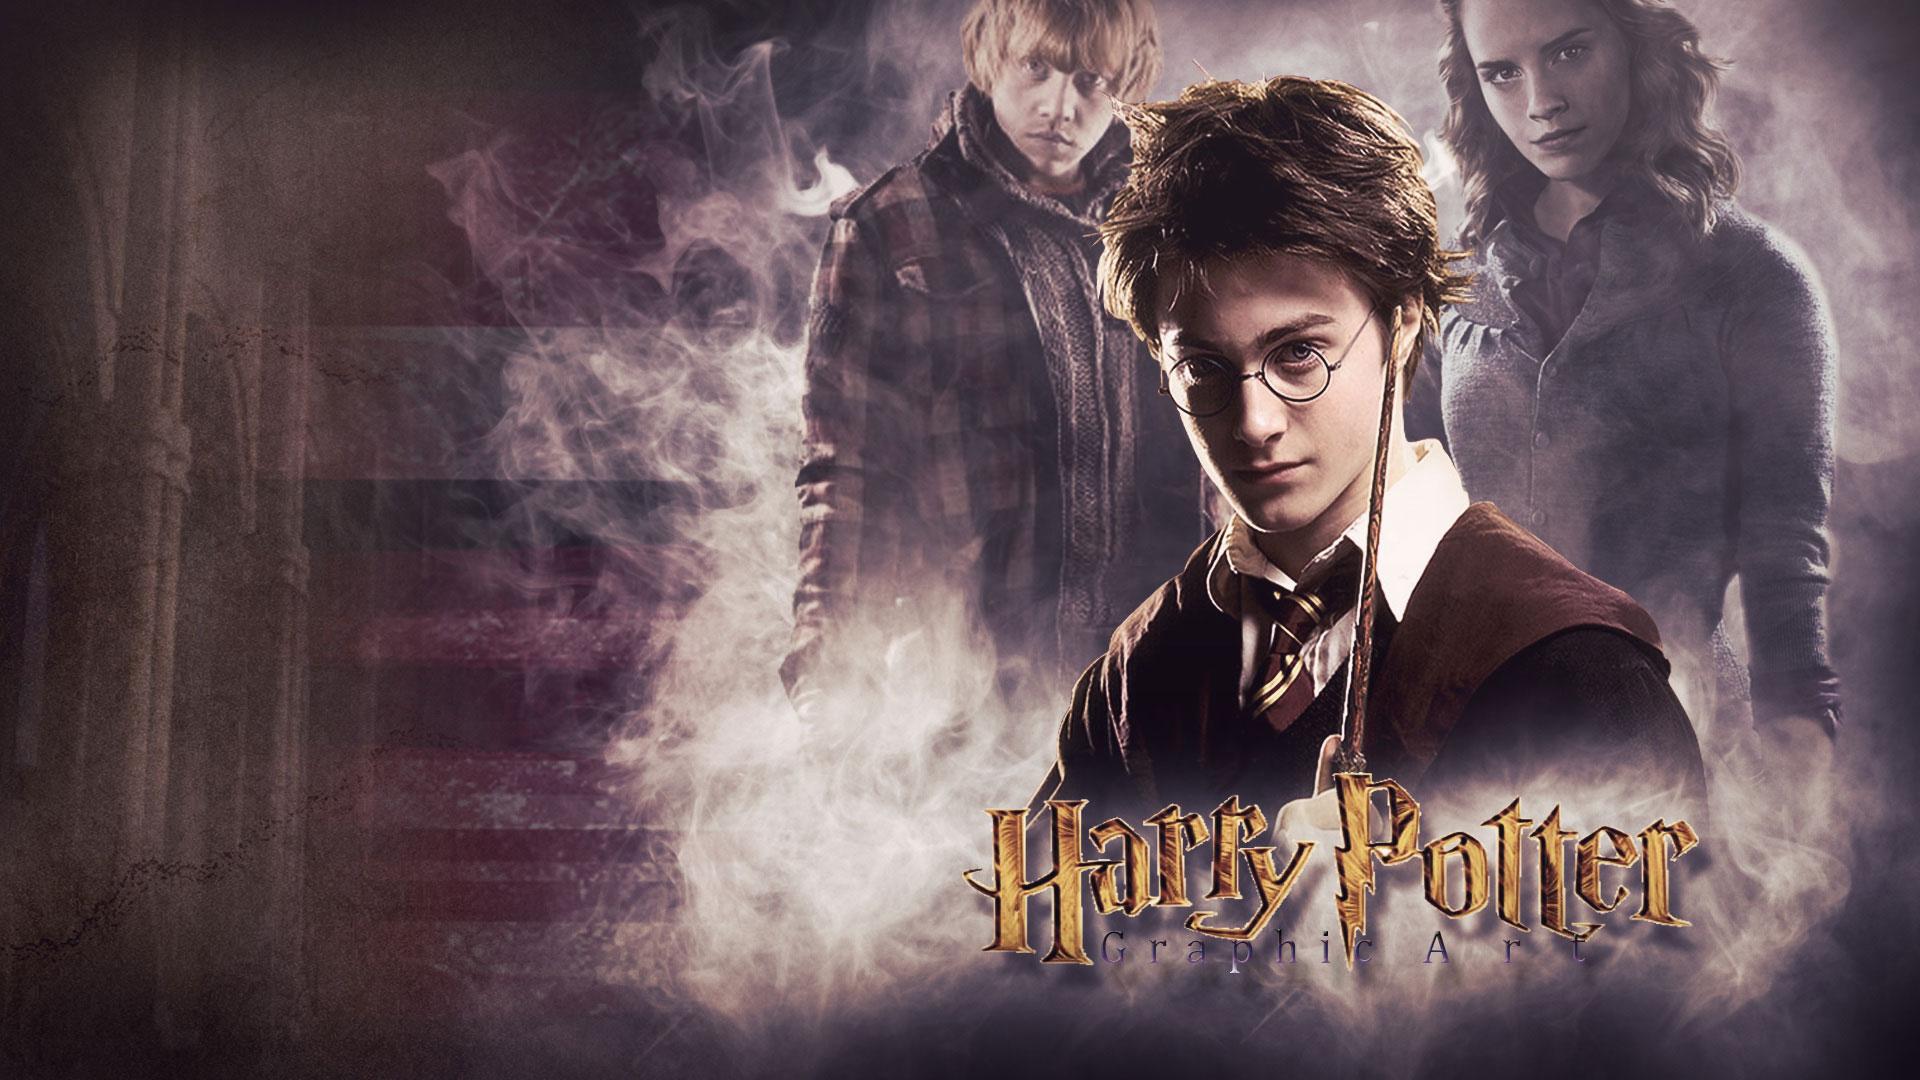 1920 x 1080 · jpeg - Harry Potter Amazing HD Wallpapers (High Resolution) - All HD Wallpapers